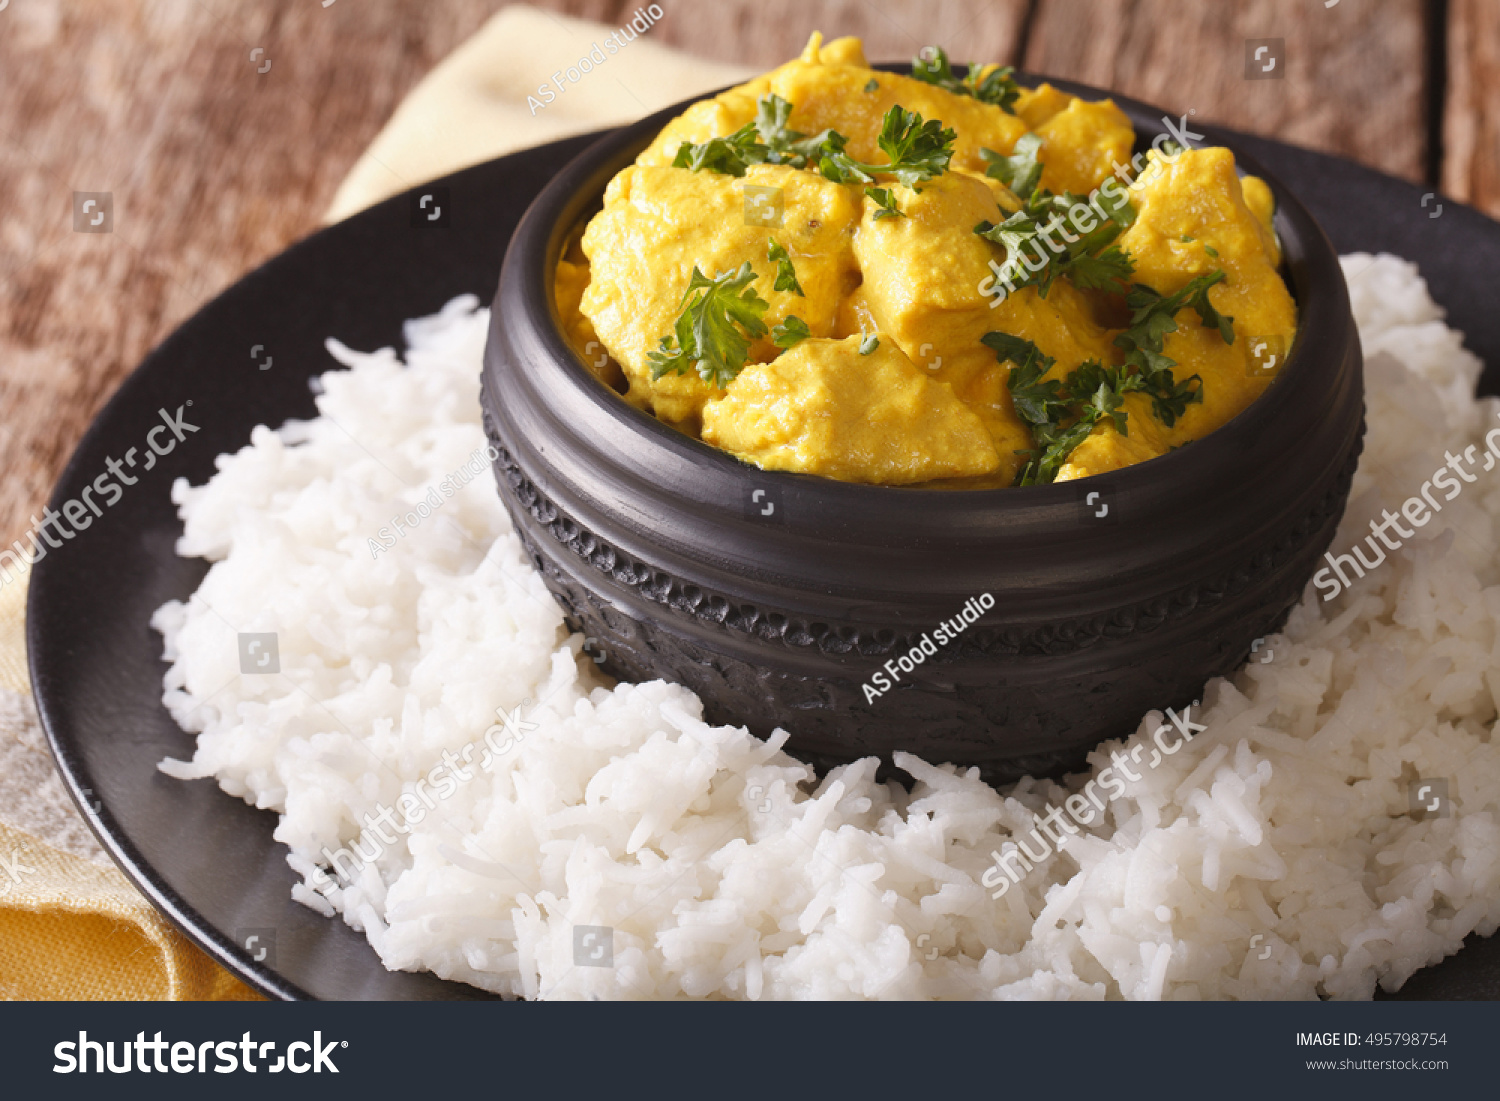 Indian chicken Korma with basmati rice close-up on the table. horizontal
 #495798754